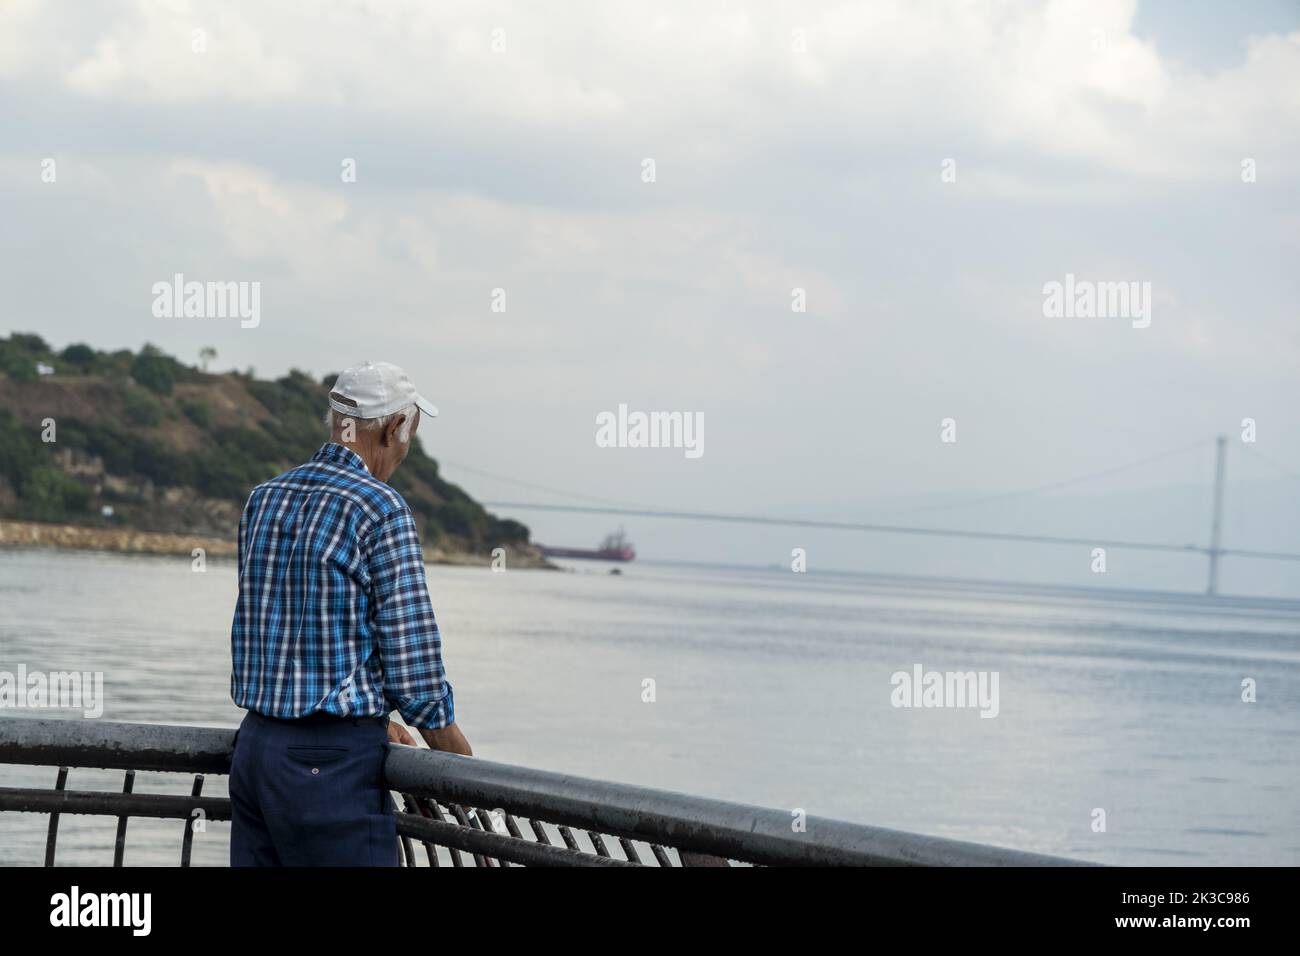 Back turned old man looking forward and trying to fishing, cinematic scene, older man's hobbies idea, calm and relaxed scene, bridge and mountain Stock Photo